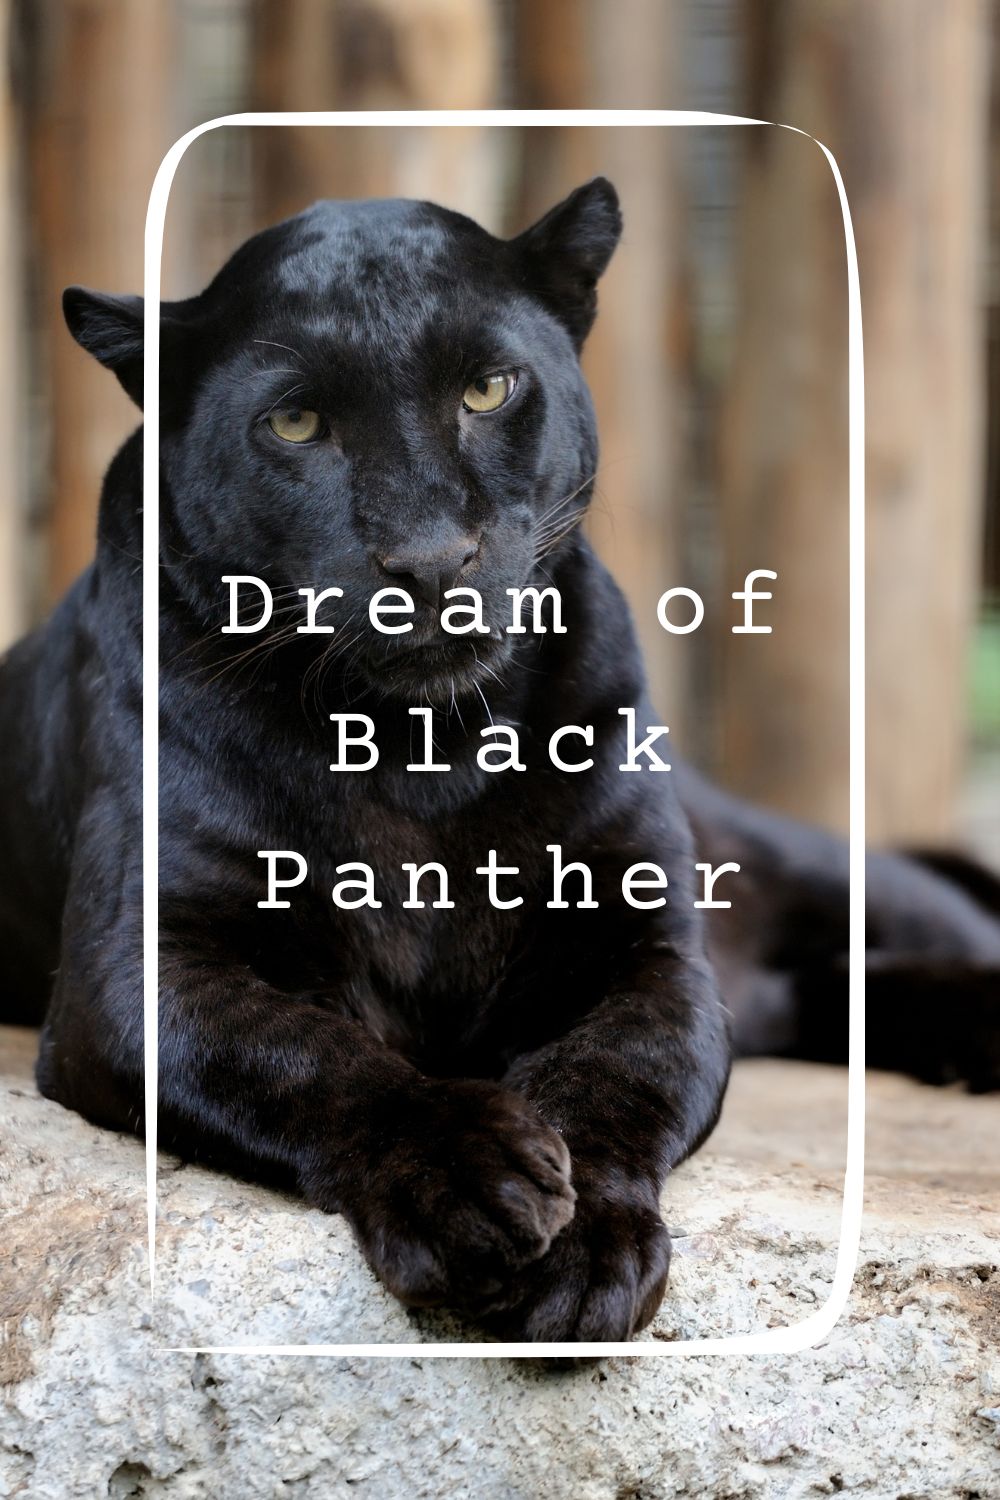 19 Dream of Black Panther Meanings4